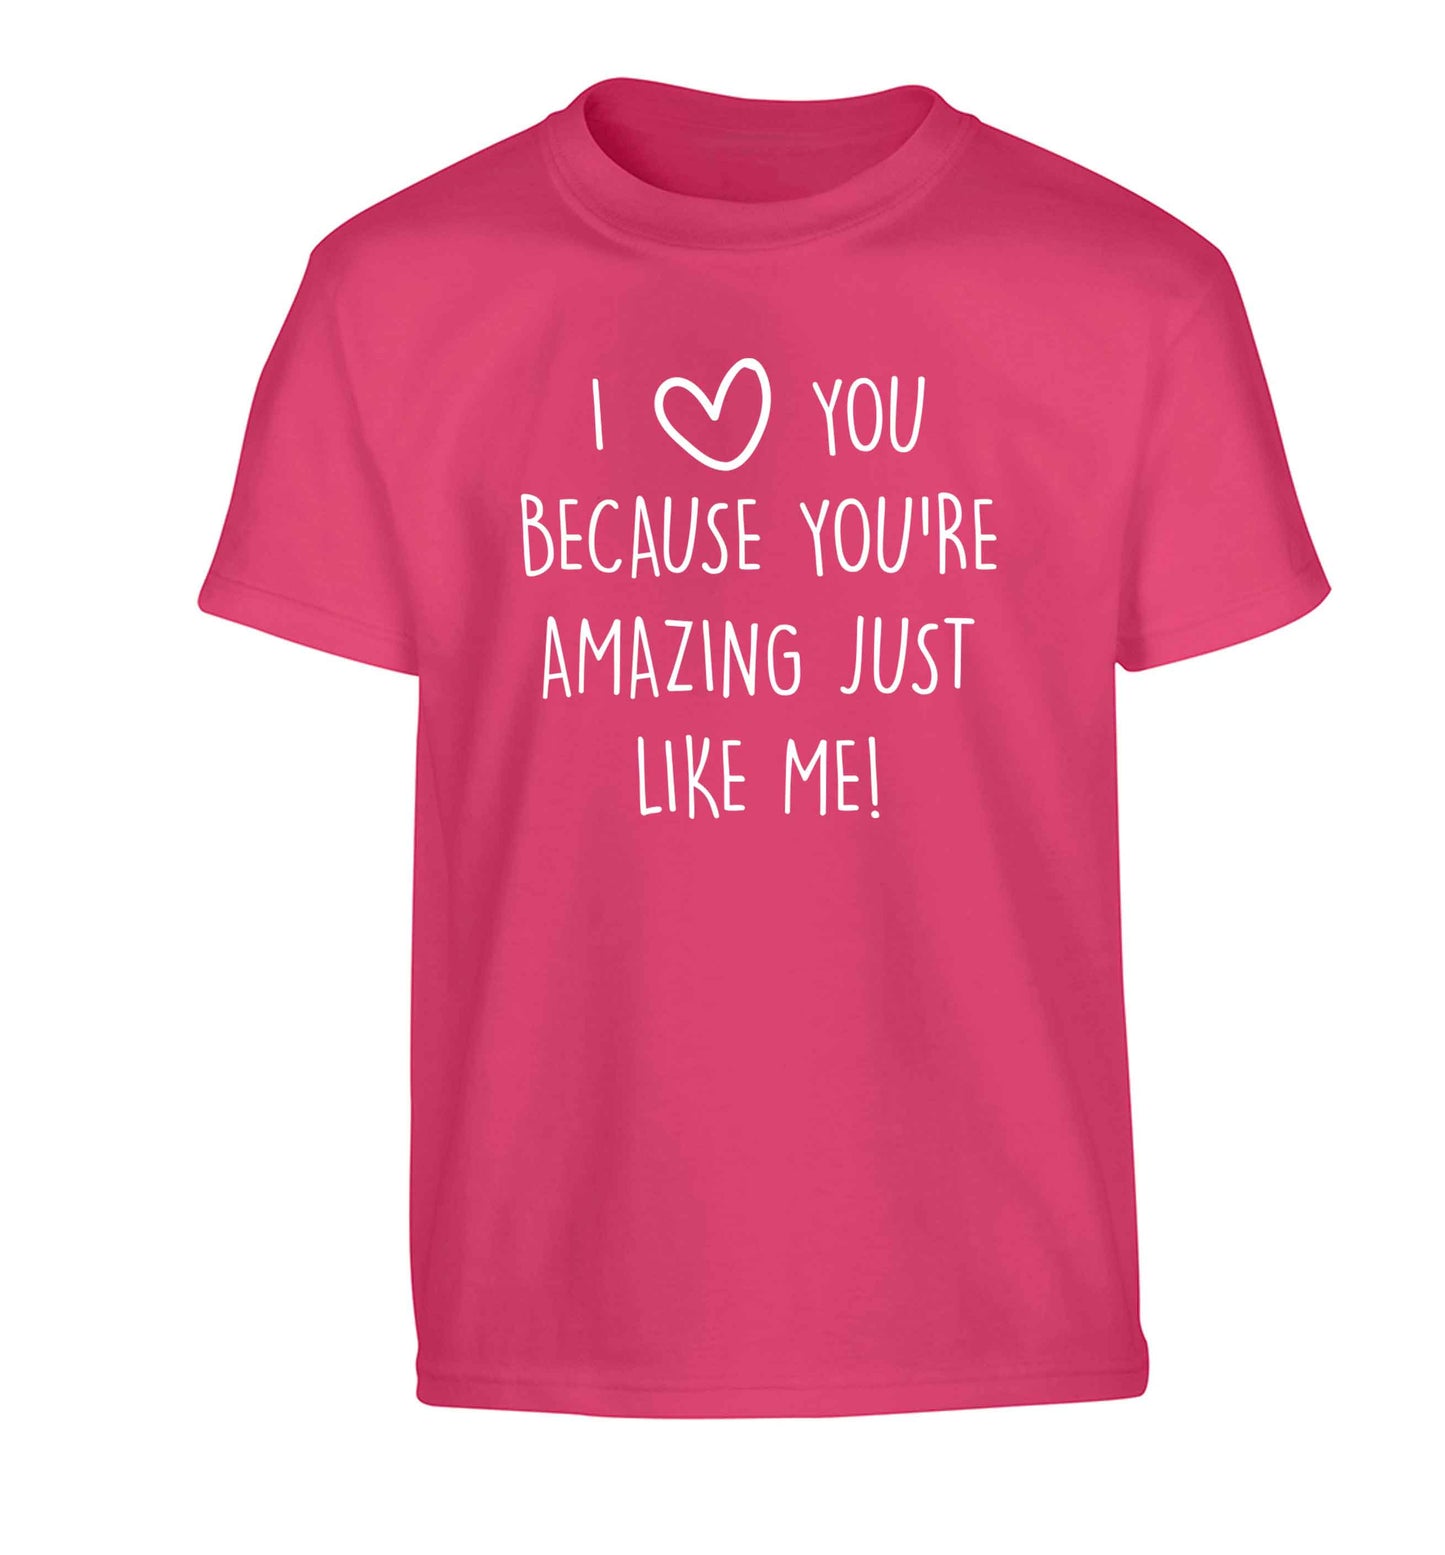 I love you because you're amazing just like me Children's pink Tshirt 12-13 Years